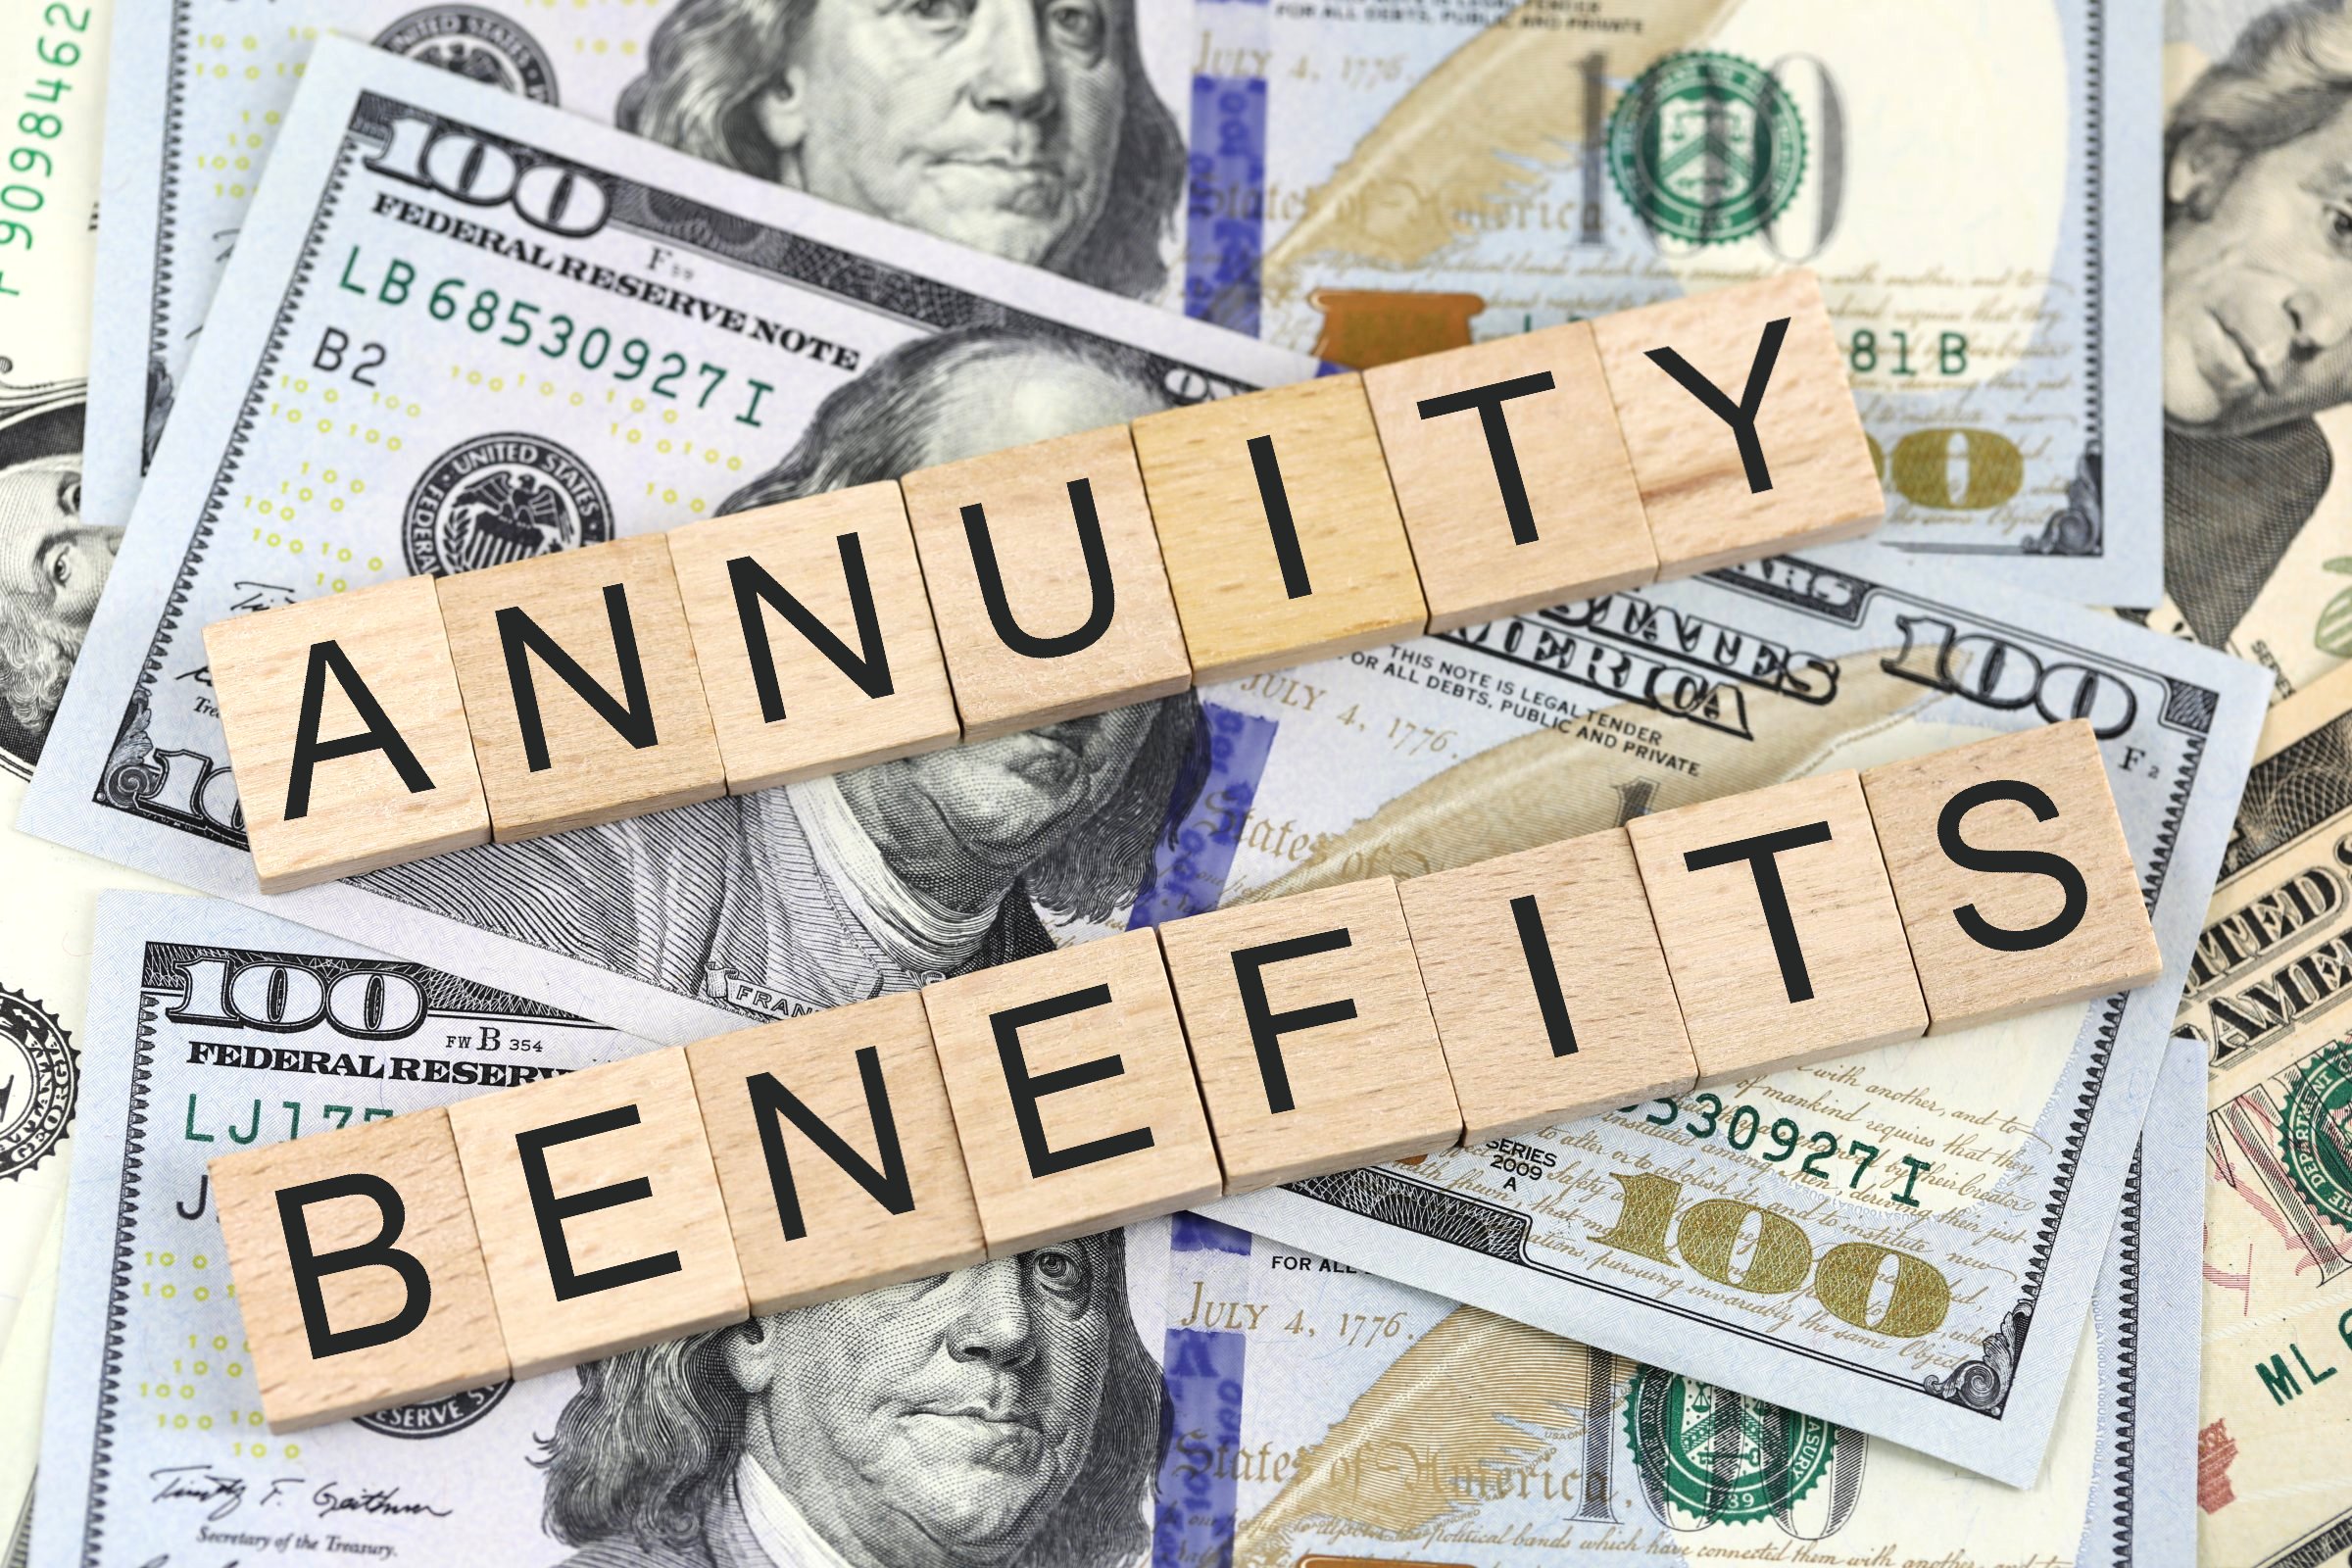 annuity benefits